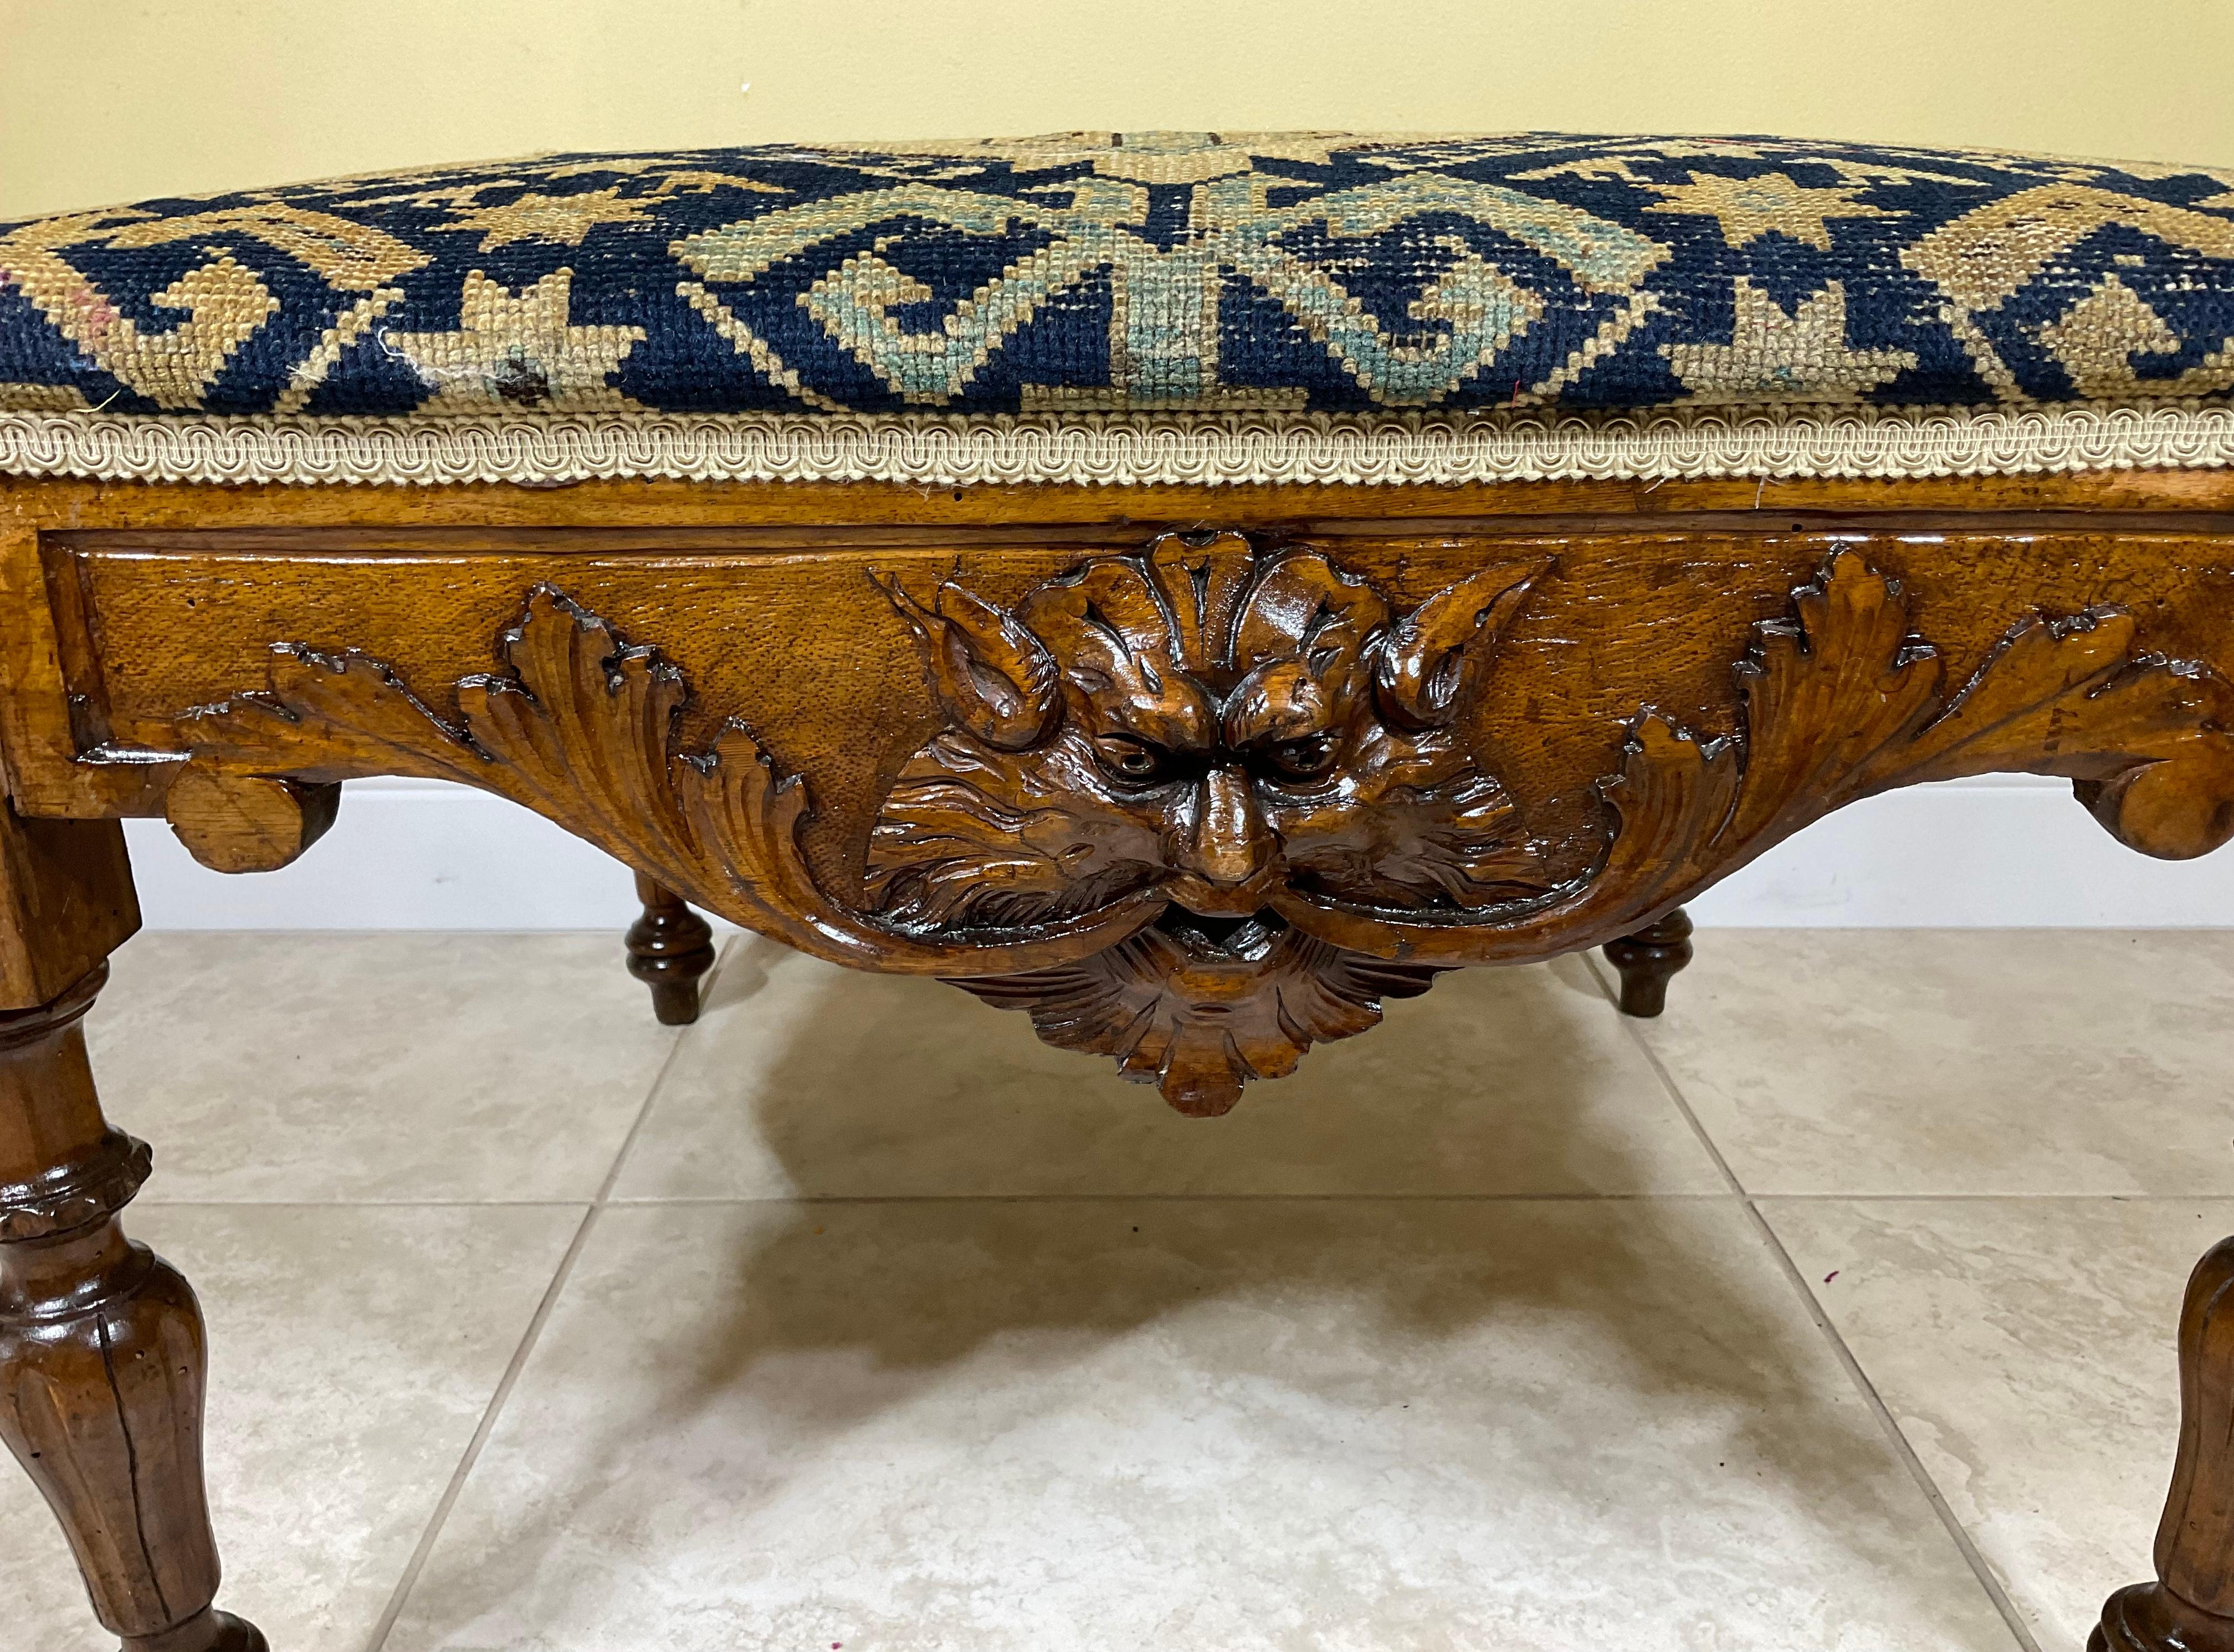 Beautifully hand carved Antiqe piece professionally restored , exceptional vivid carving with one side Mythological face , upholstered with exceptional antique Kazak rug with geometric patterns. Great functions could use as low table , low sit ,or